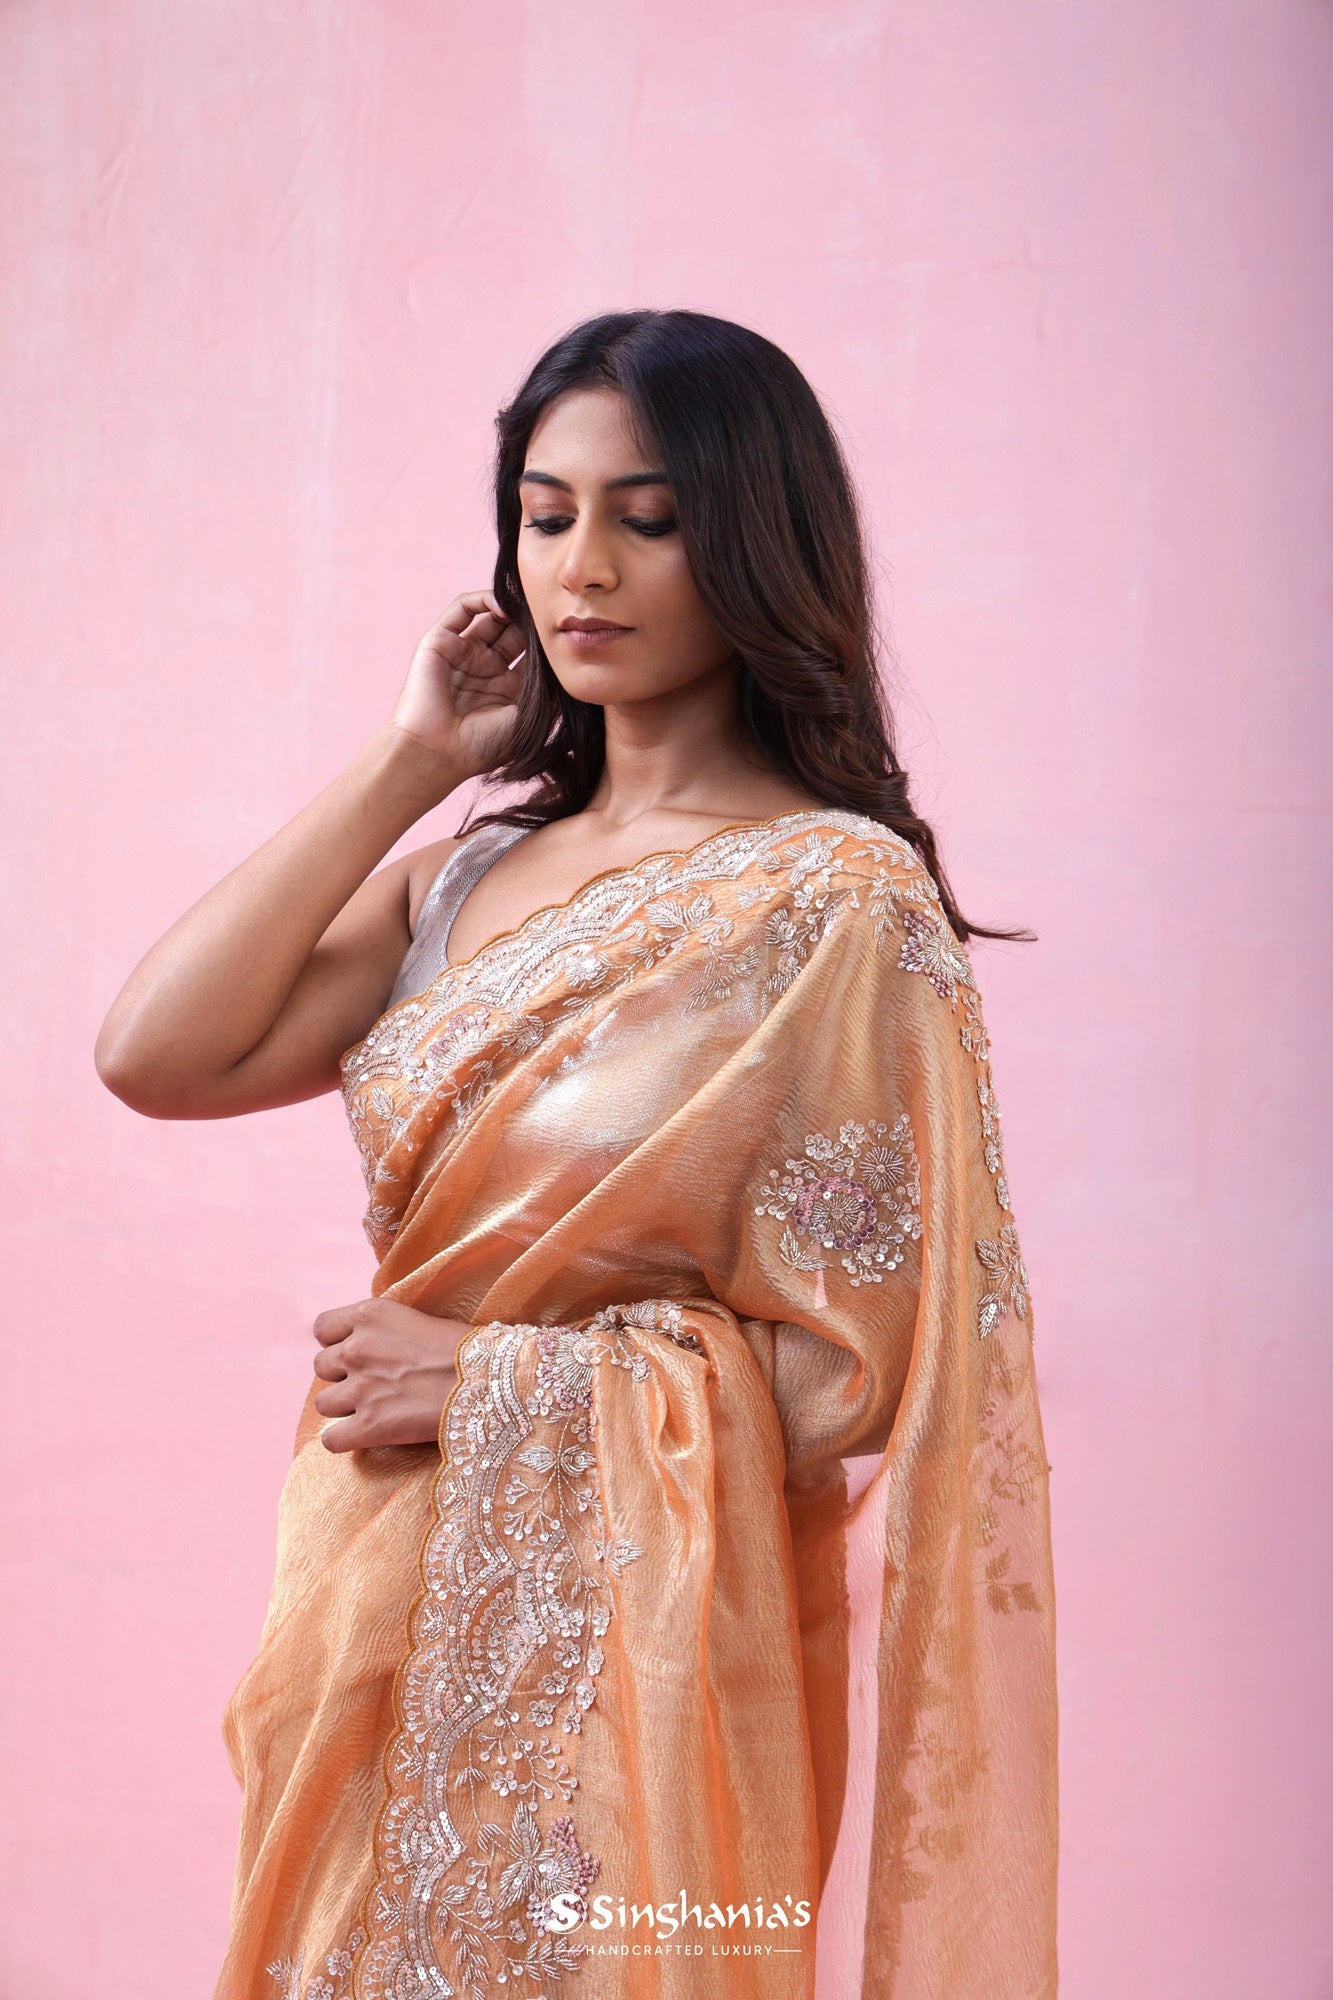 Apricot Peach Crushed Tissue Organza Saree With Hand Embroidery